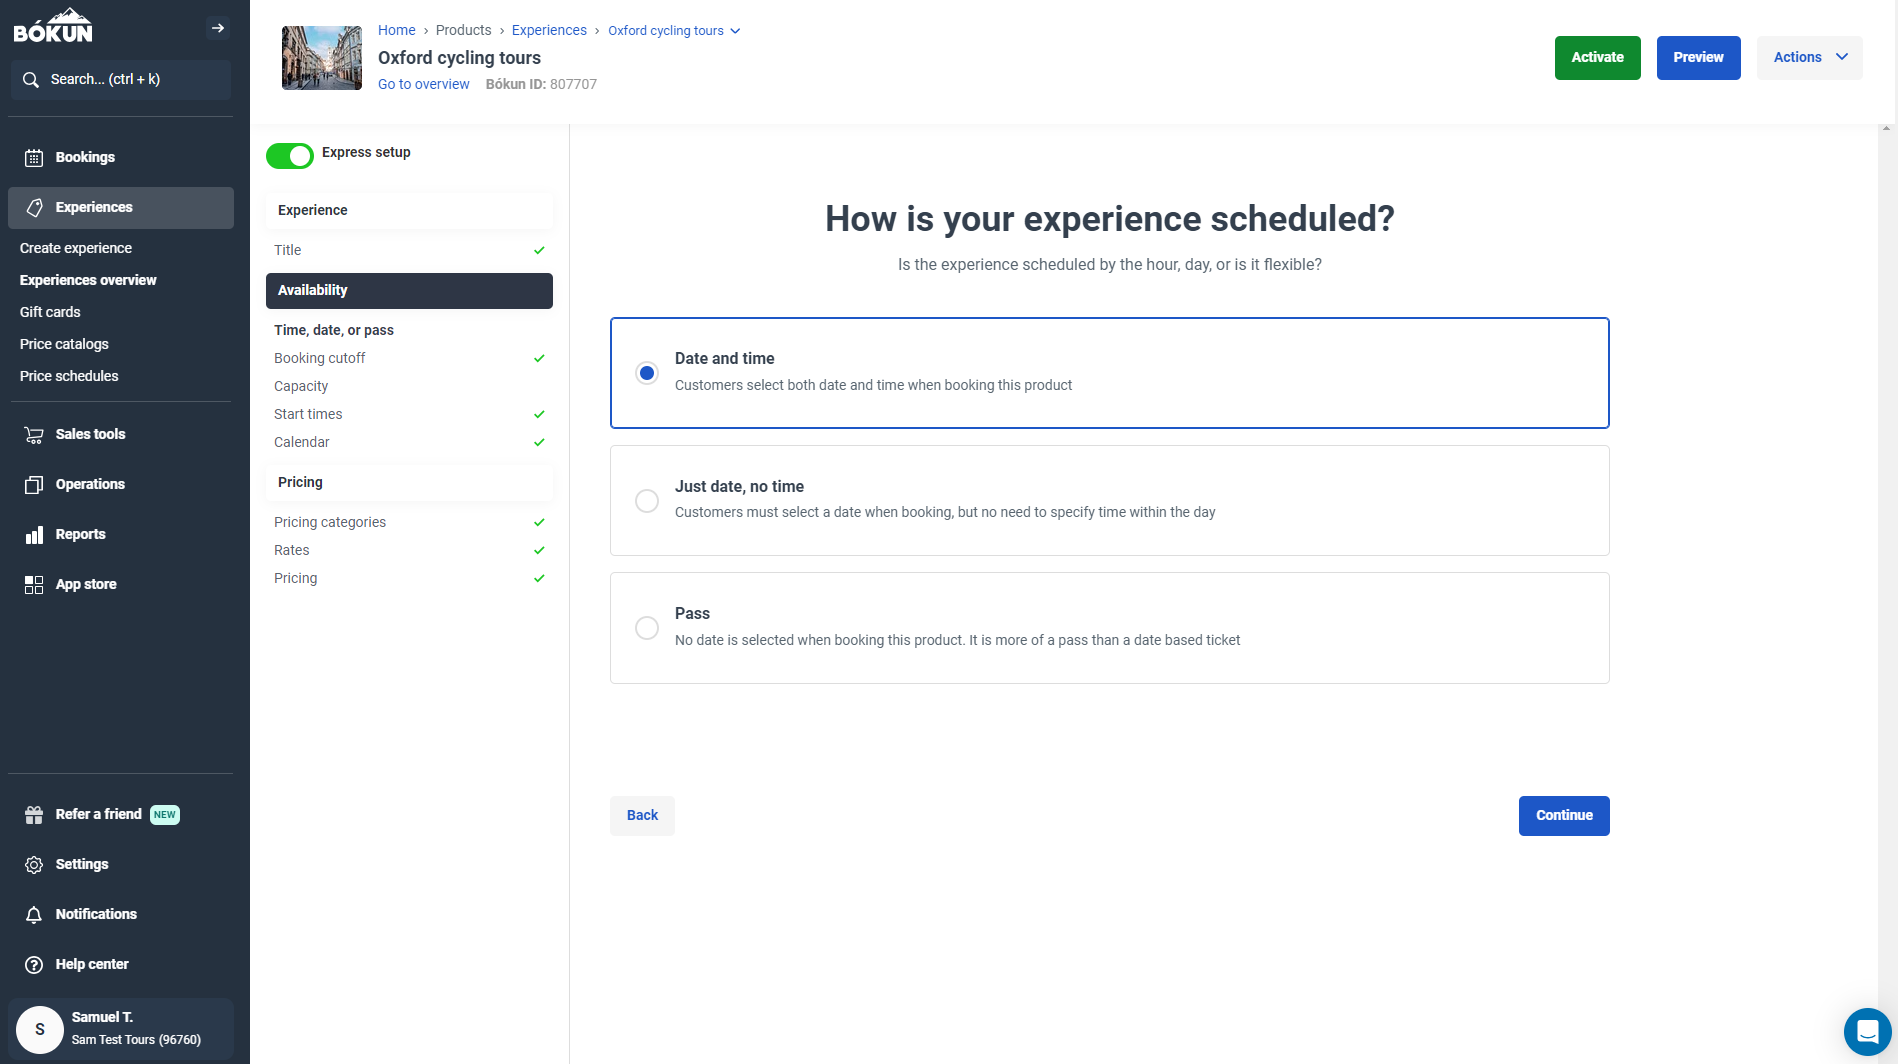 How is your experience scheduled? (Date and Time)